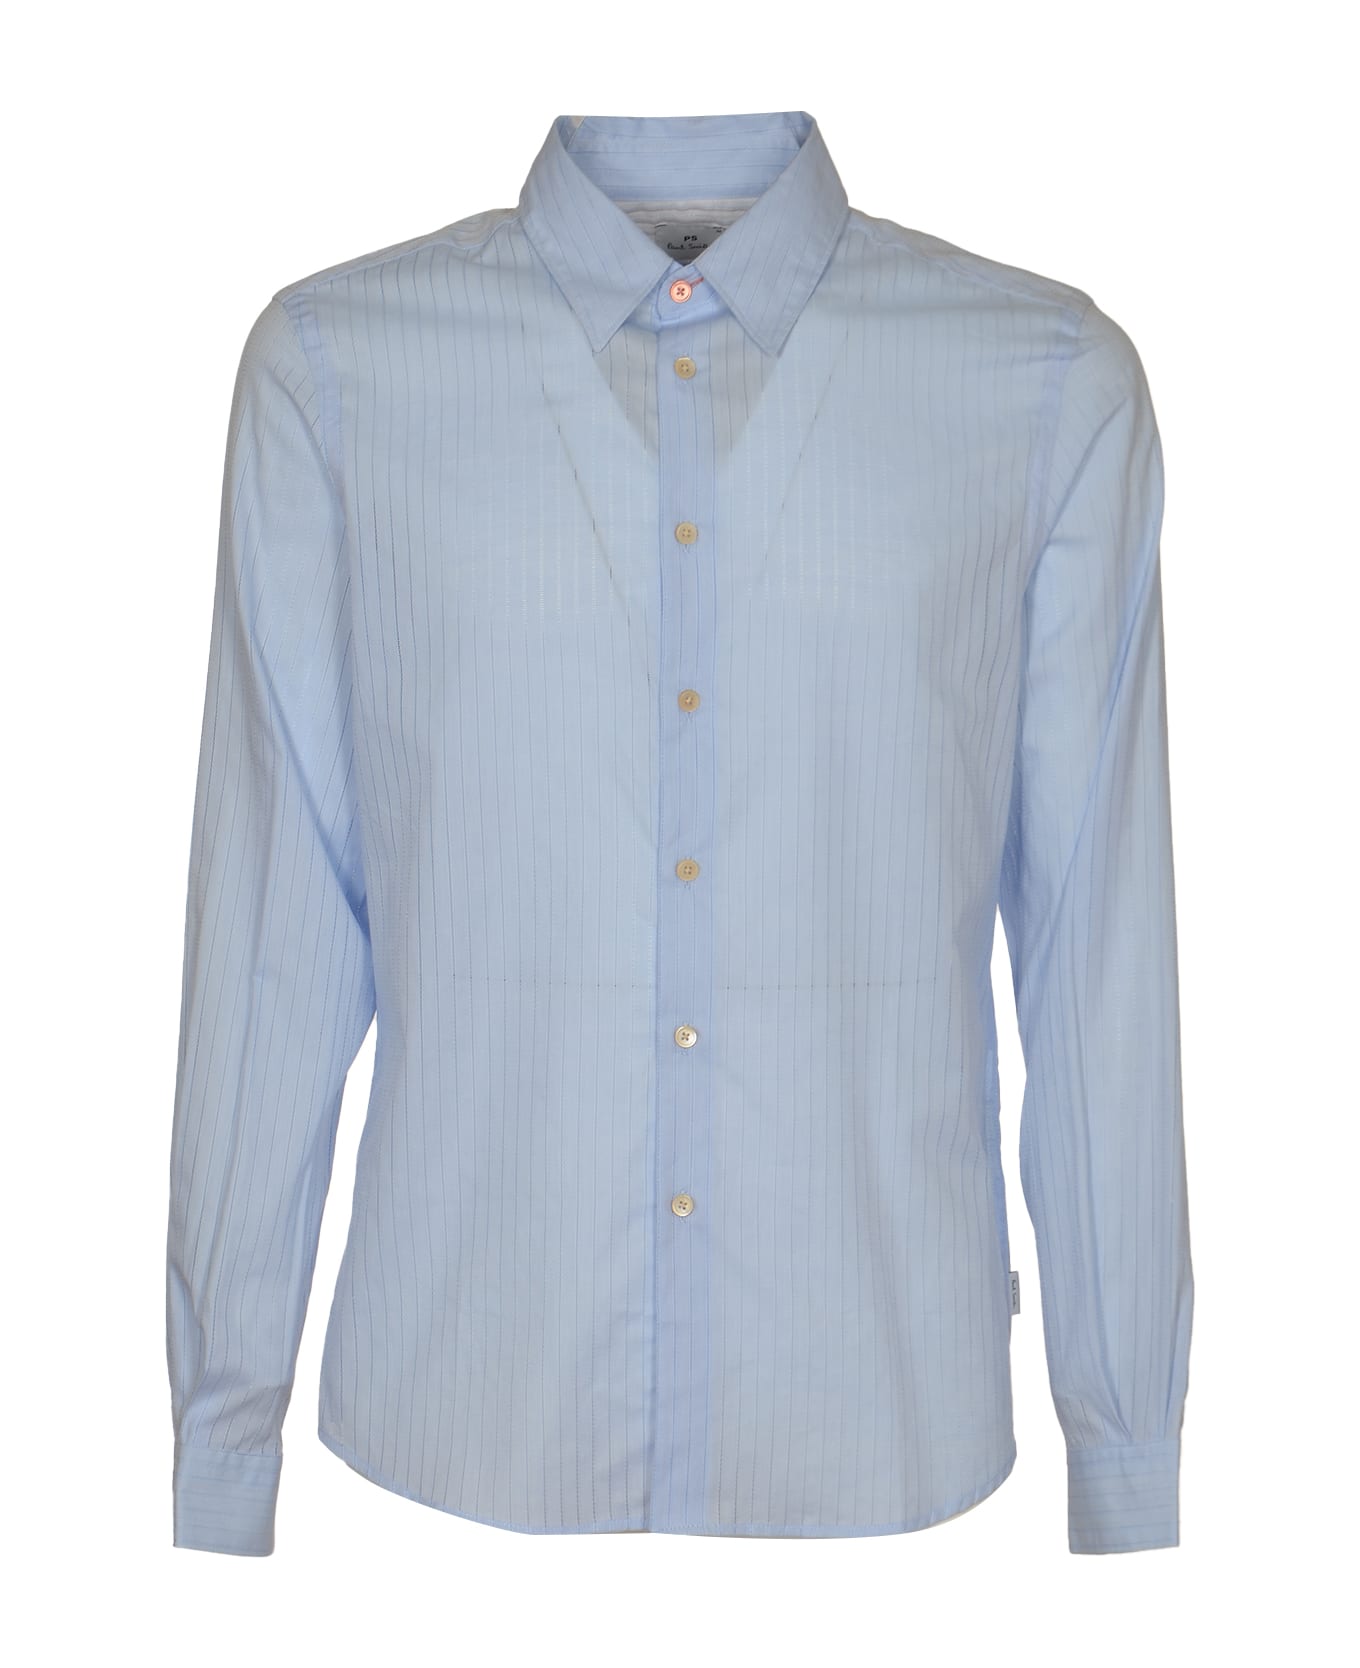 Paul Smith Mens Ls Tailored Fit Shirt - Blues シャツ